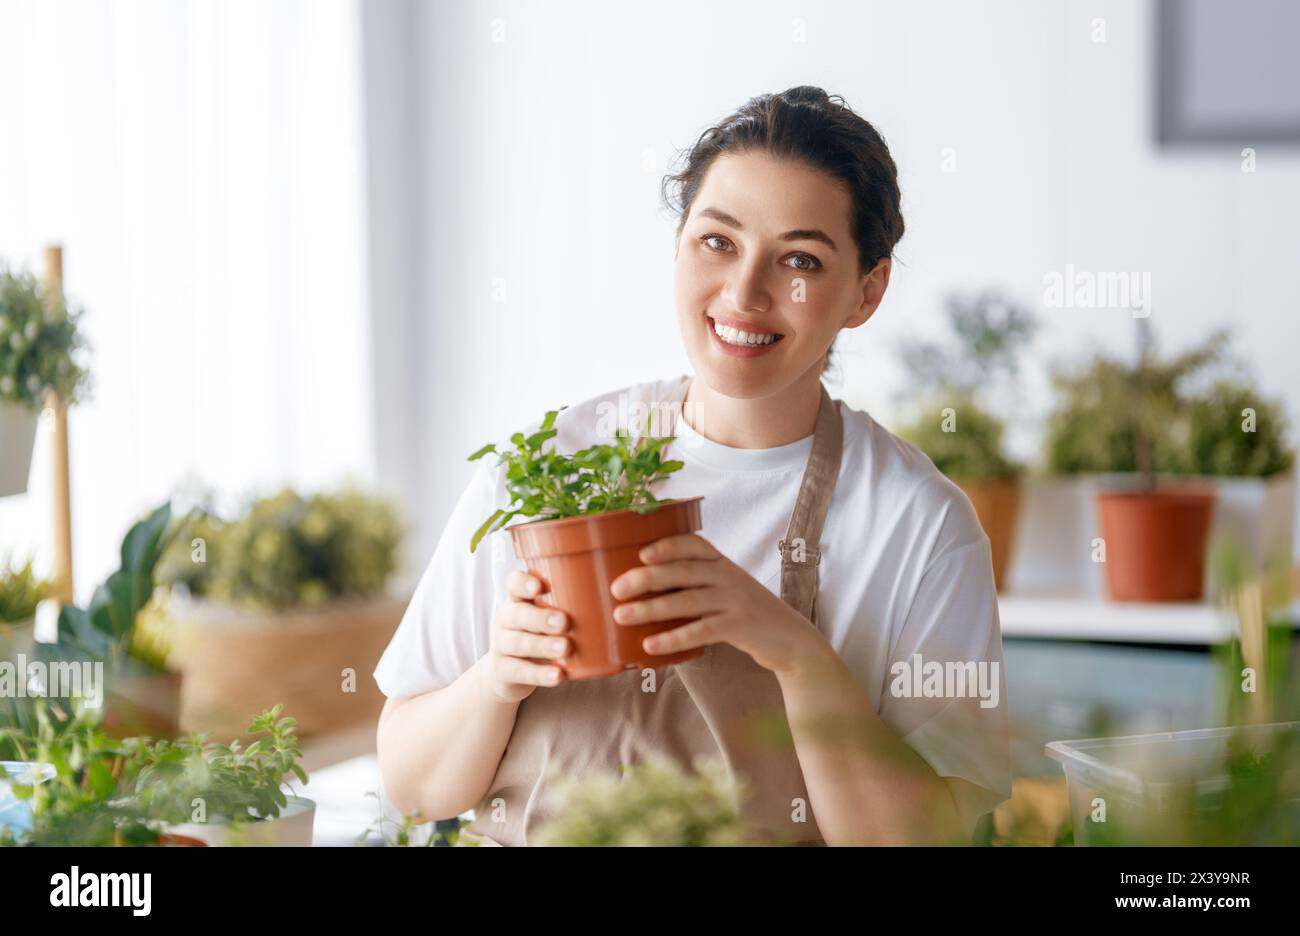 Woman caring for plants at home in spring day. Stock Photo